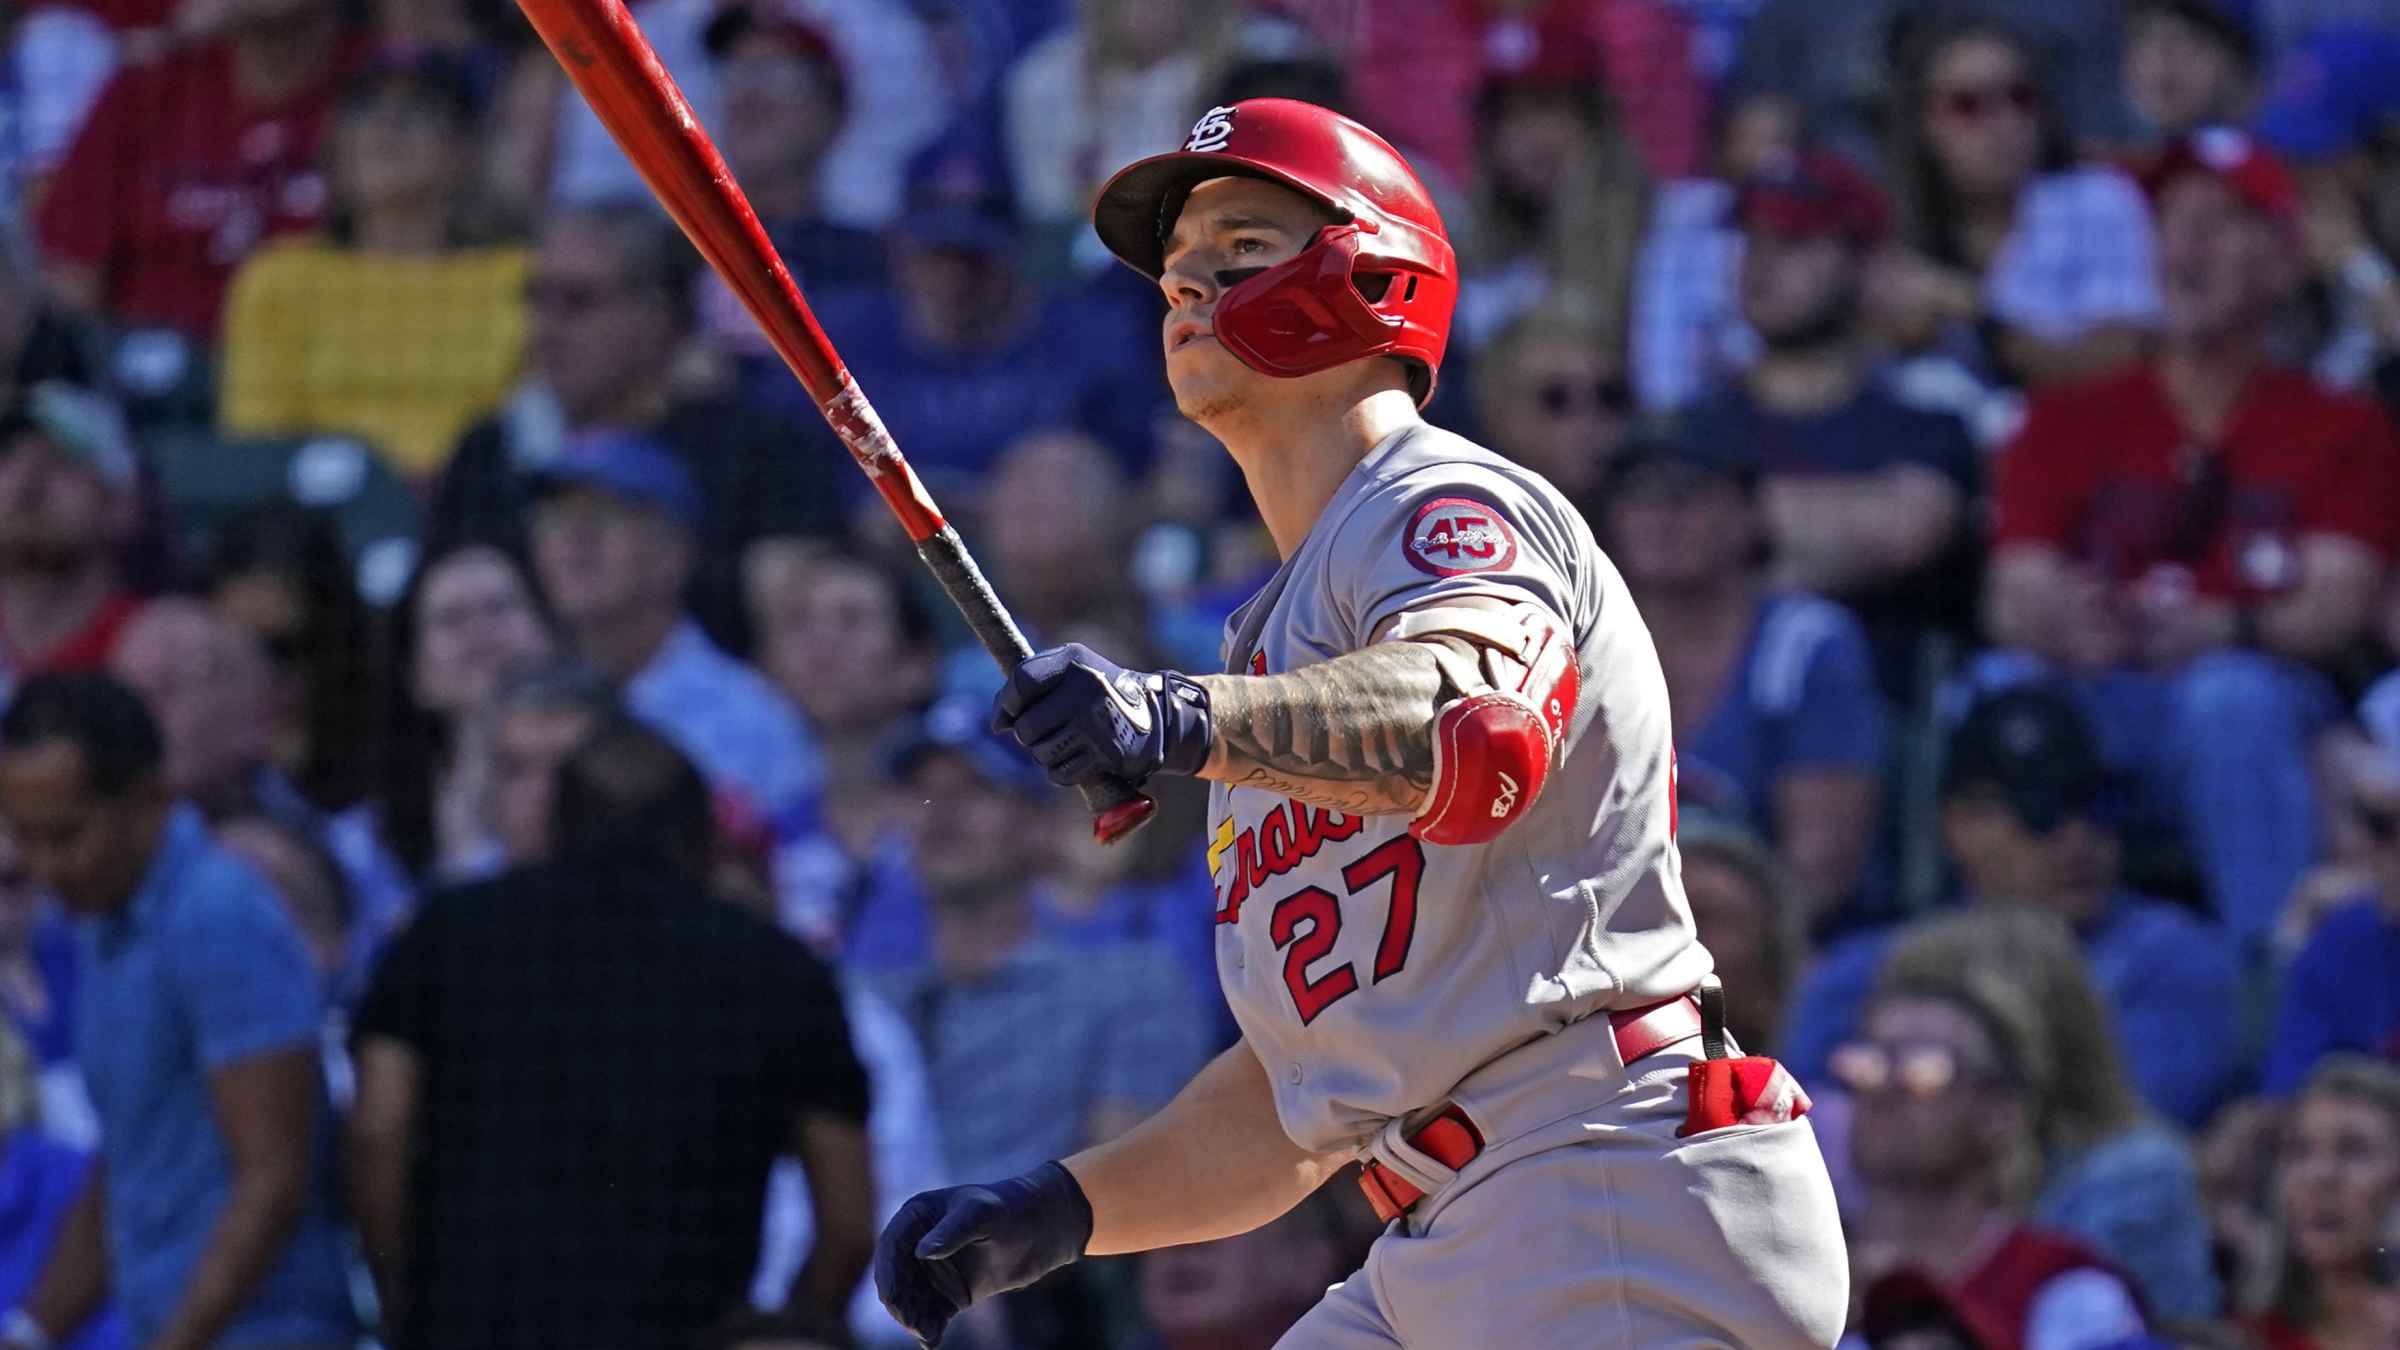 Goldschmidt helps Cardinals beat Cubs for 13th straight win